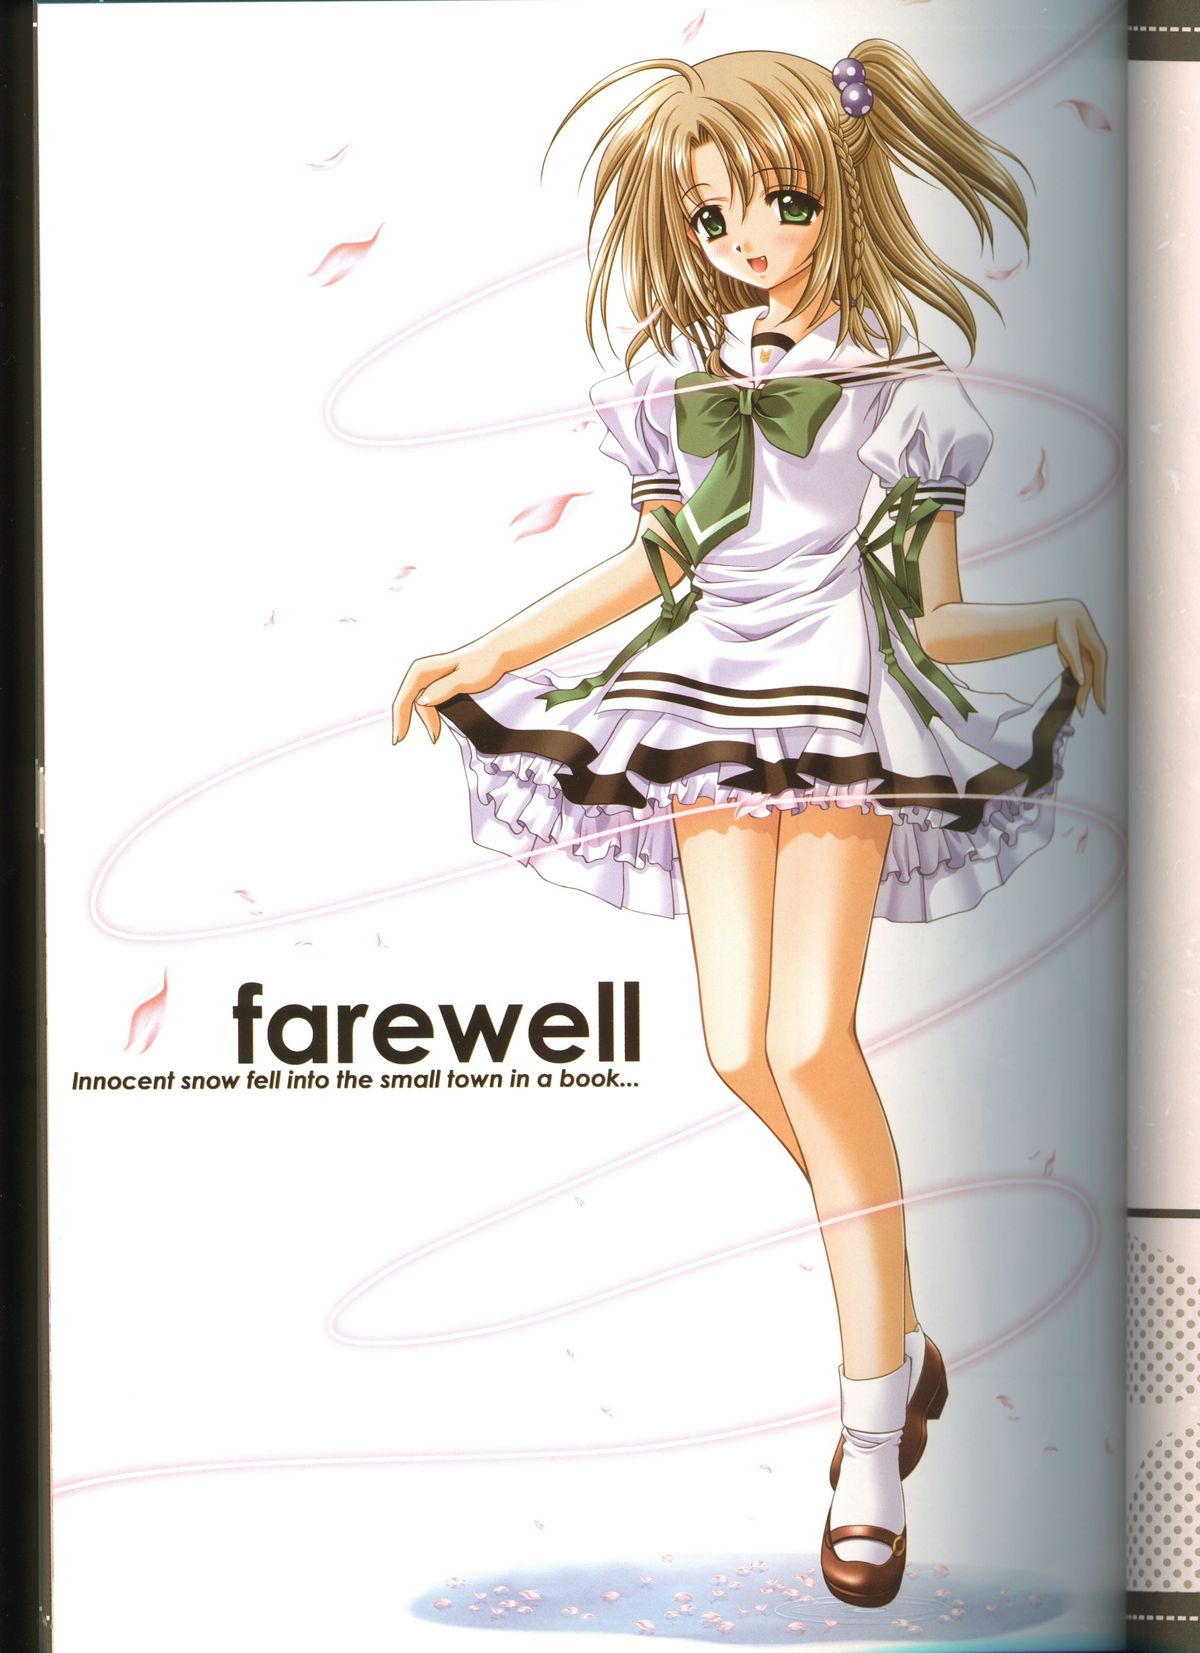 (C63) [JOKER TYPE (西又葵)] それは舞い散る桜のように・線画集 Vol.2 「farewell -Innocent snow fell into the small town in a book...」 (それは舞い散る桜のように)